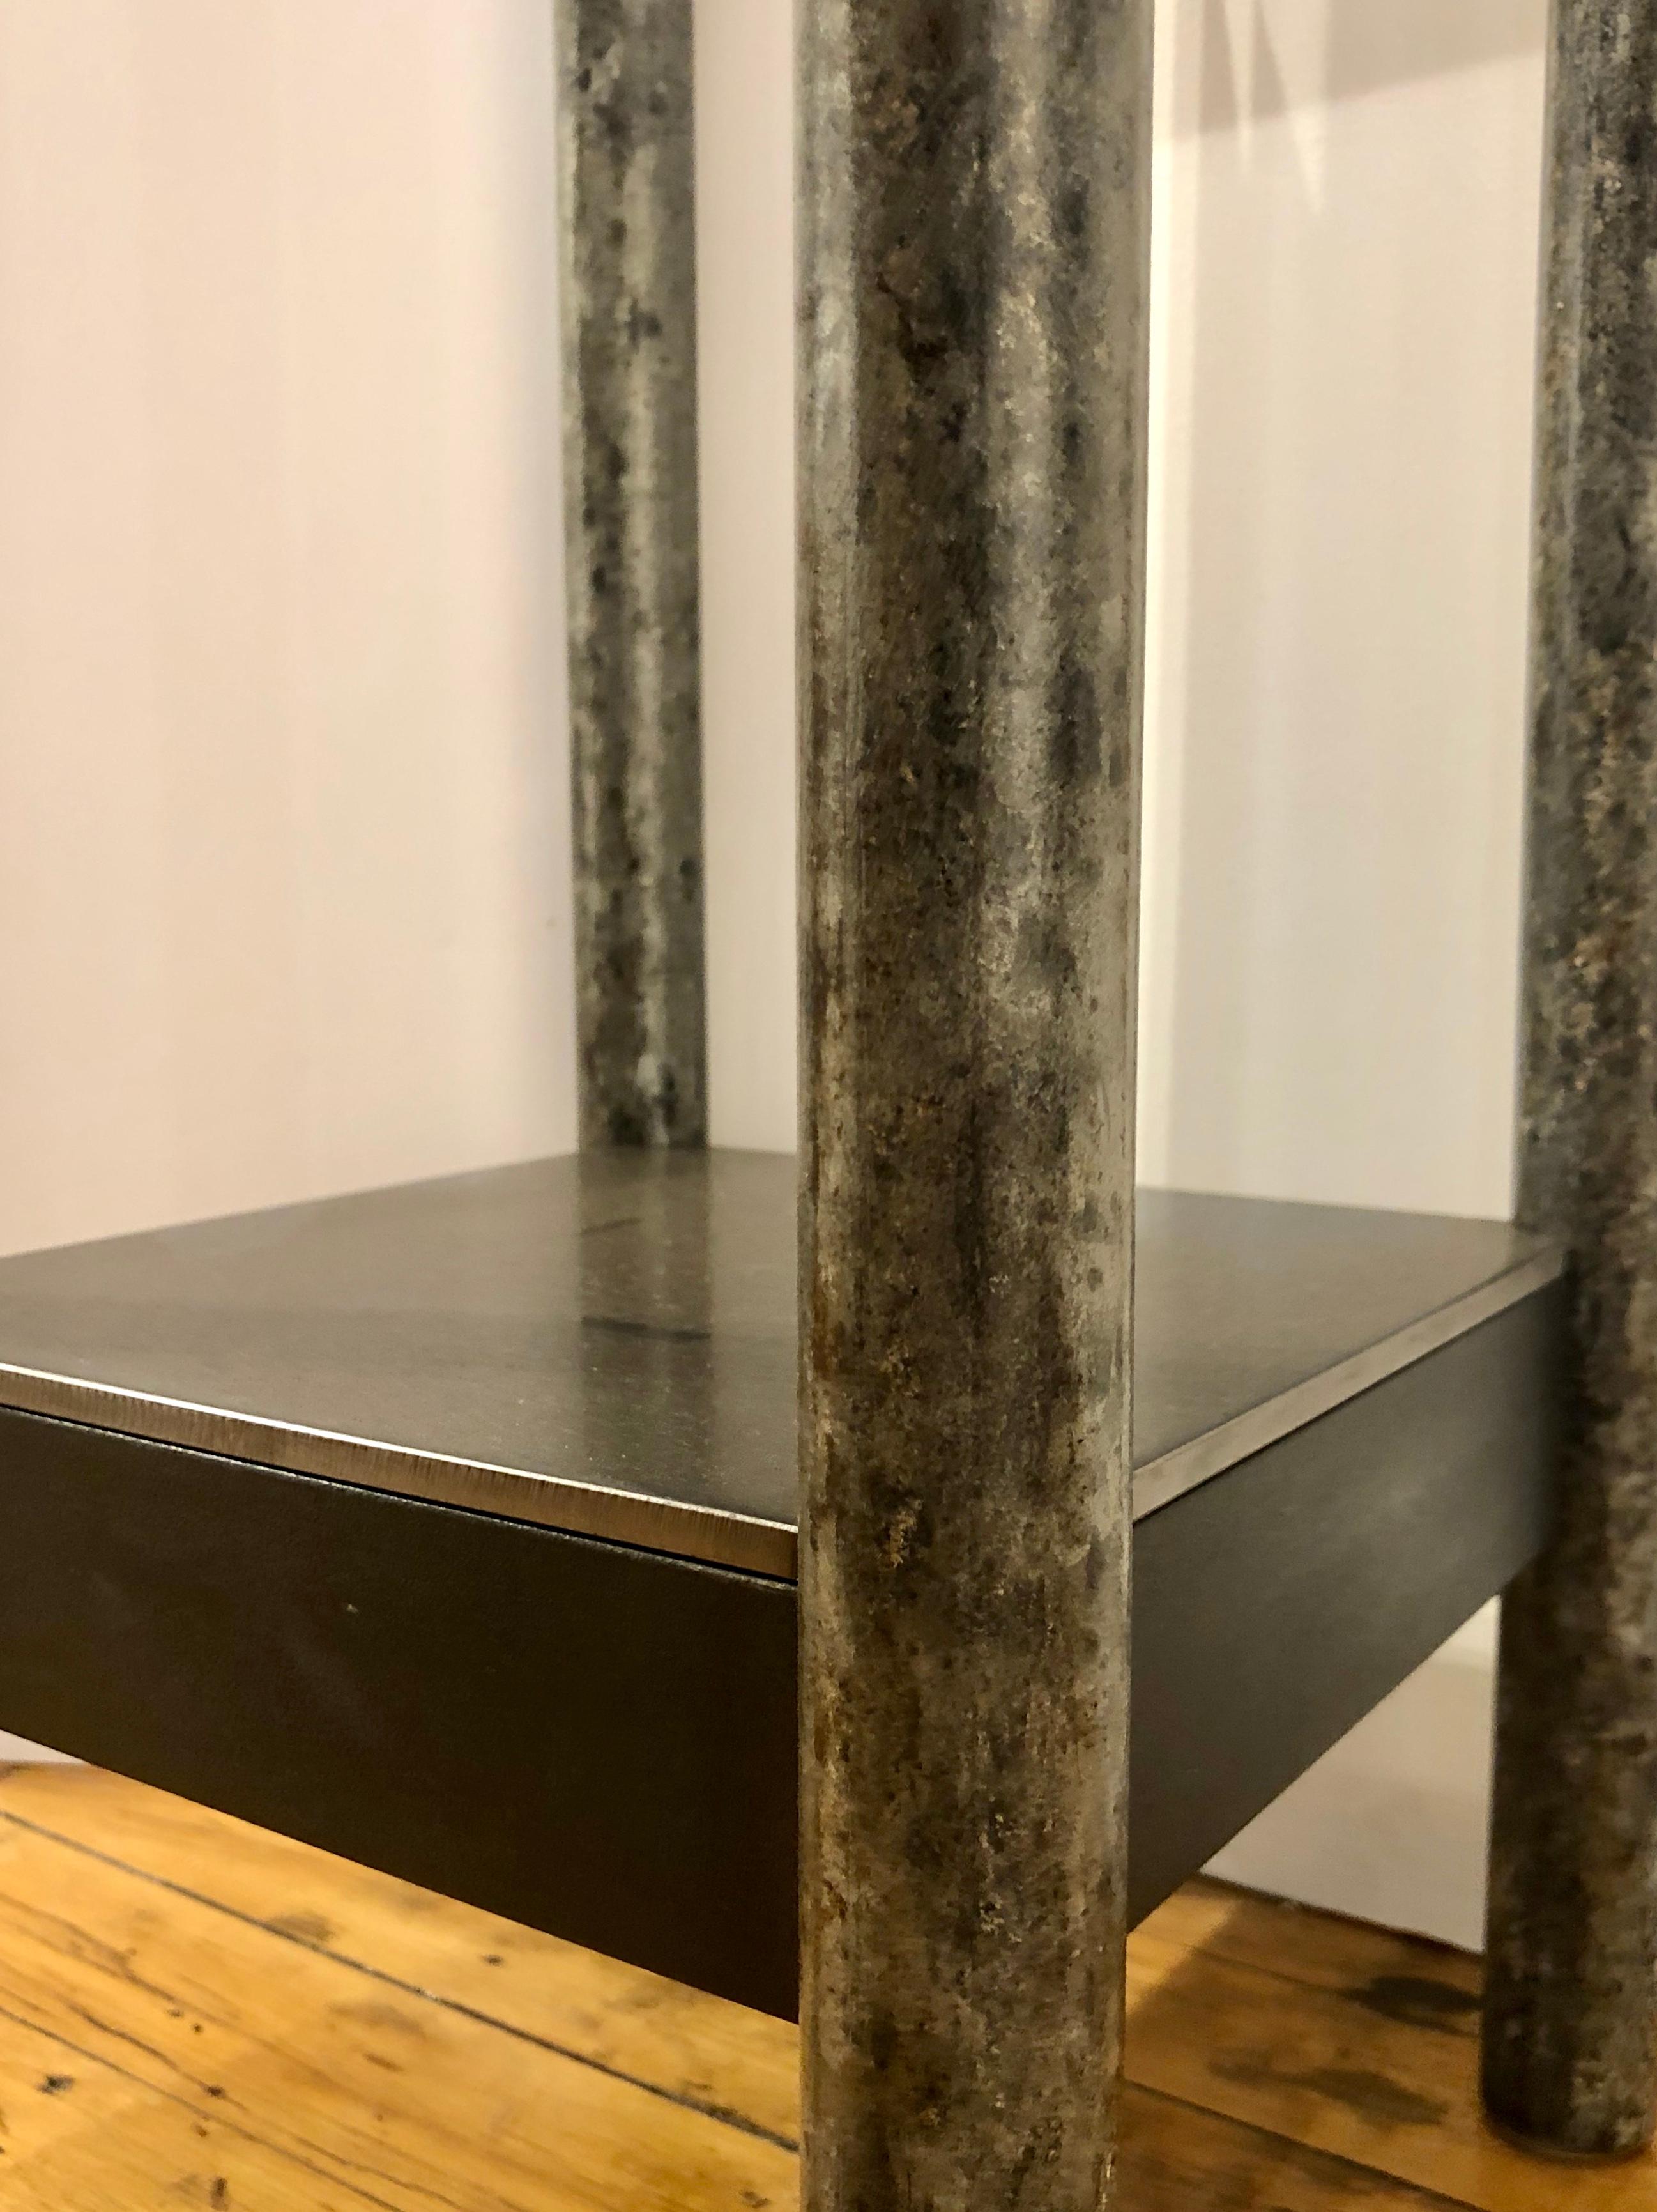 This is a welded steel industrial modern pedestal with a low shelf and skirt. Each piece of furniture is unique and made by Jim Rose. The legs are salvaged galvanized steel pipe. This table represents the ultimate in sustainable design and is